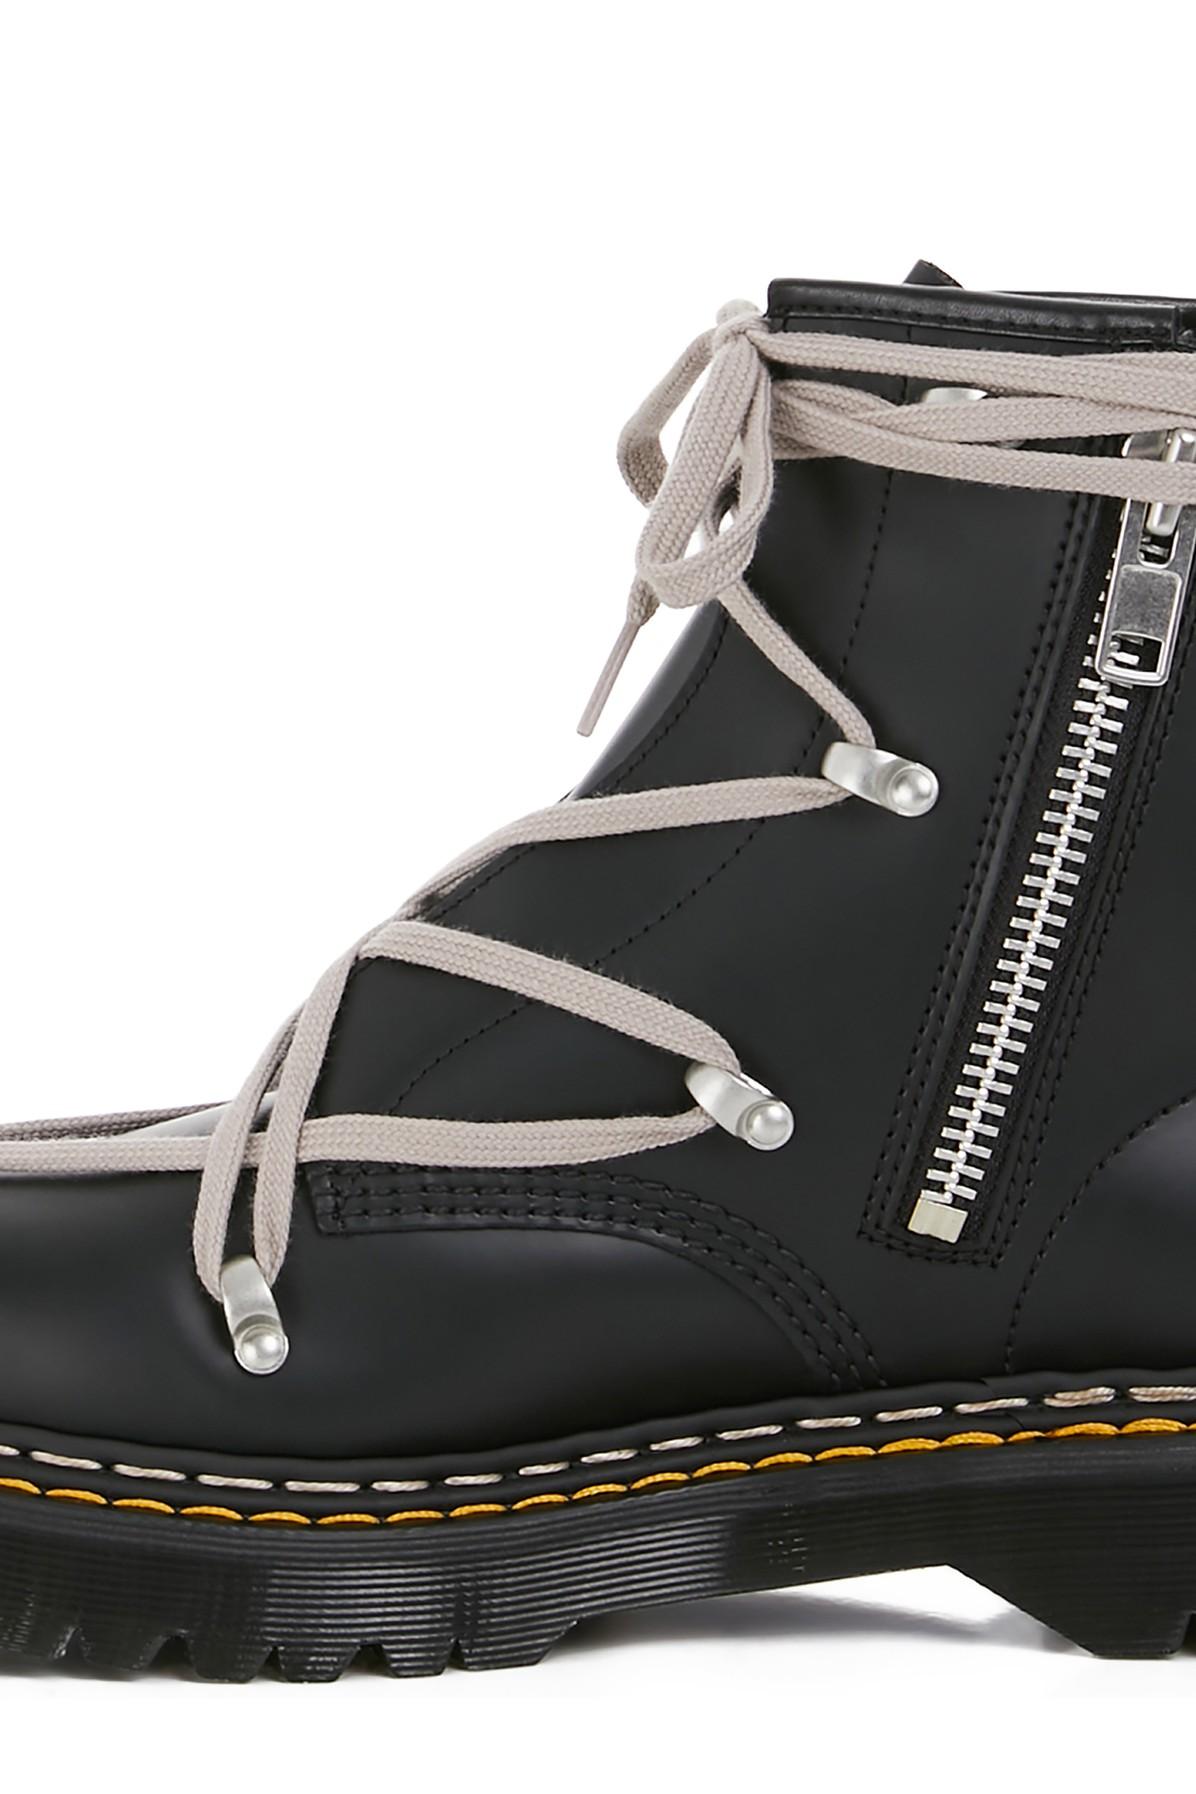 Rick Owens X Dr. Martens - Boots in Black | Lyst